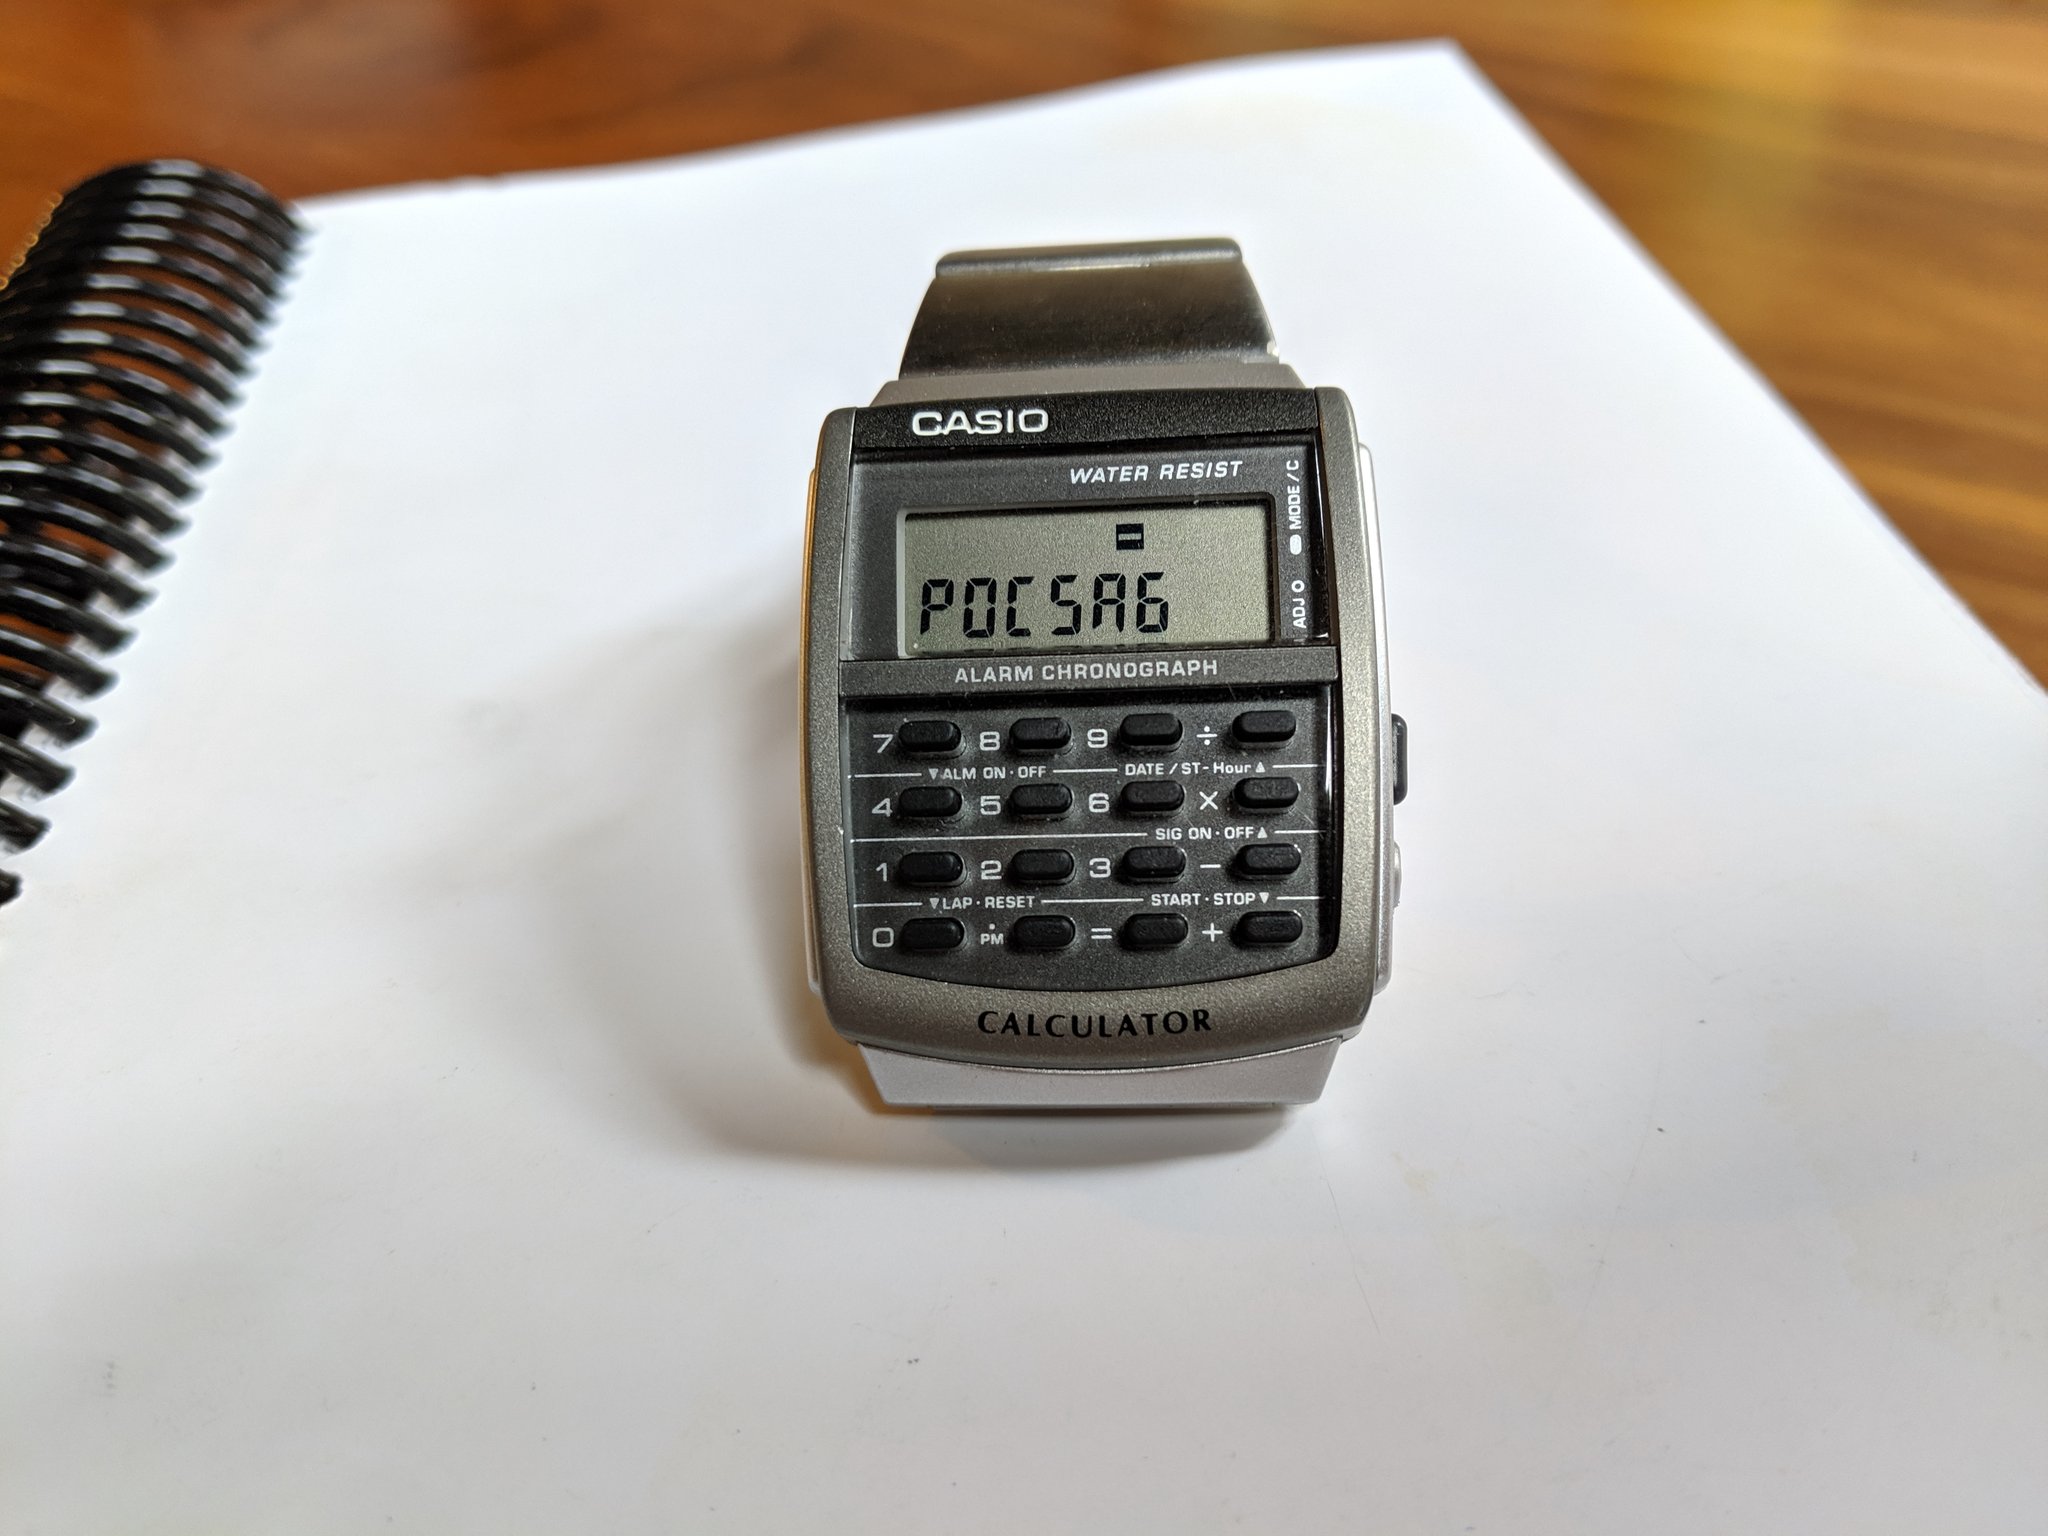 POCSAG receiver in a GoodWatch